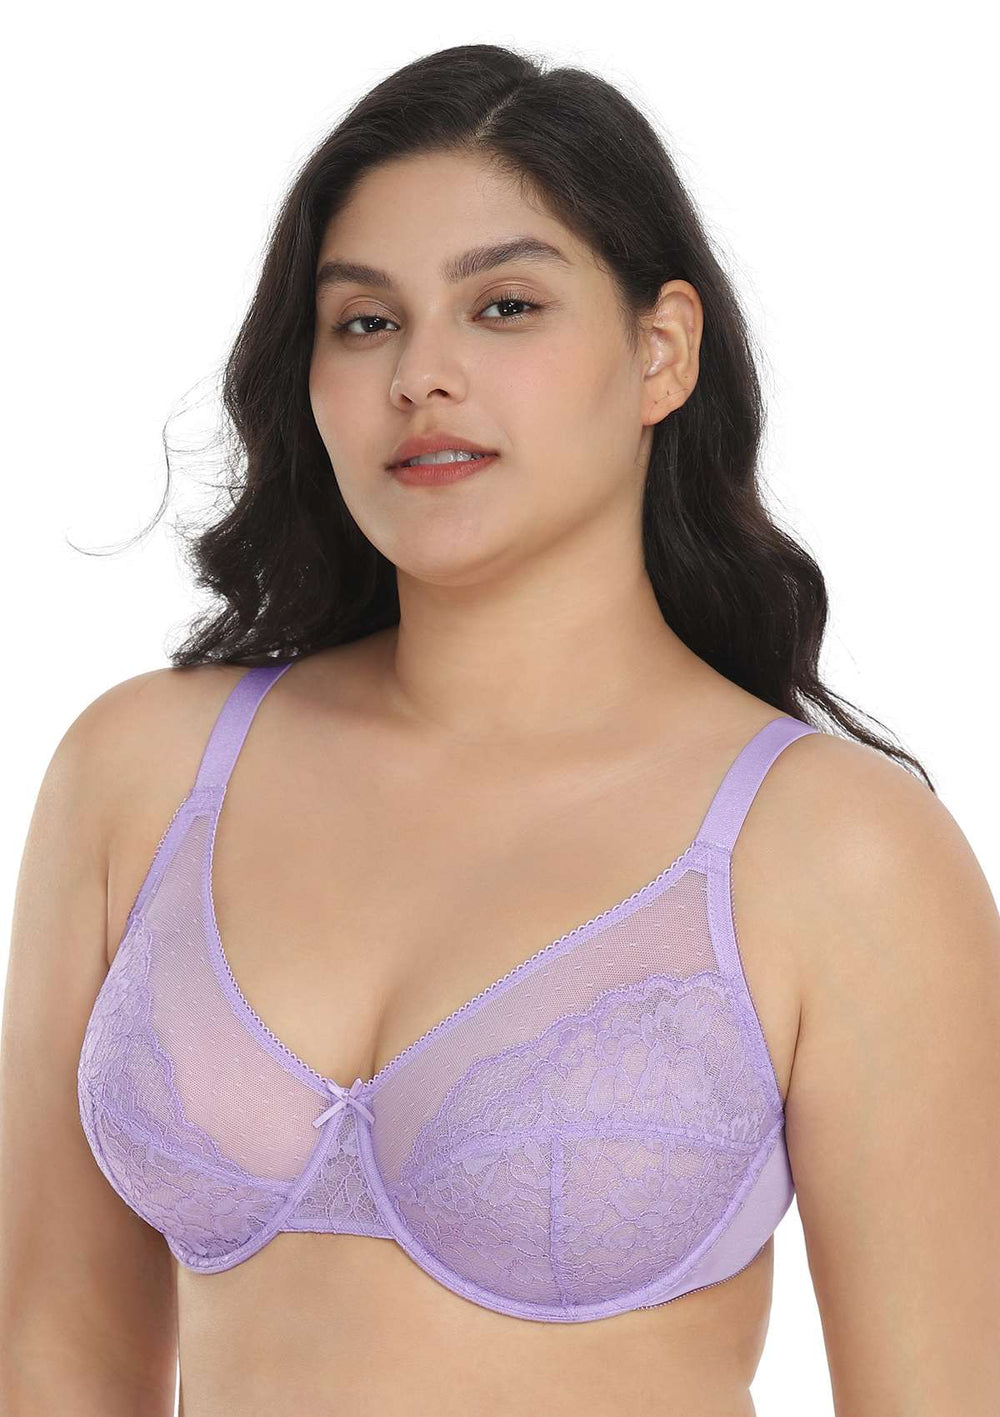 HSIA Enchante Bra and Panty Sets: Unpadded Bra with Back Support